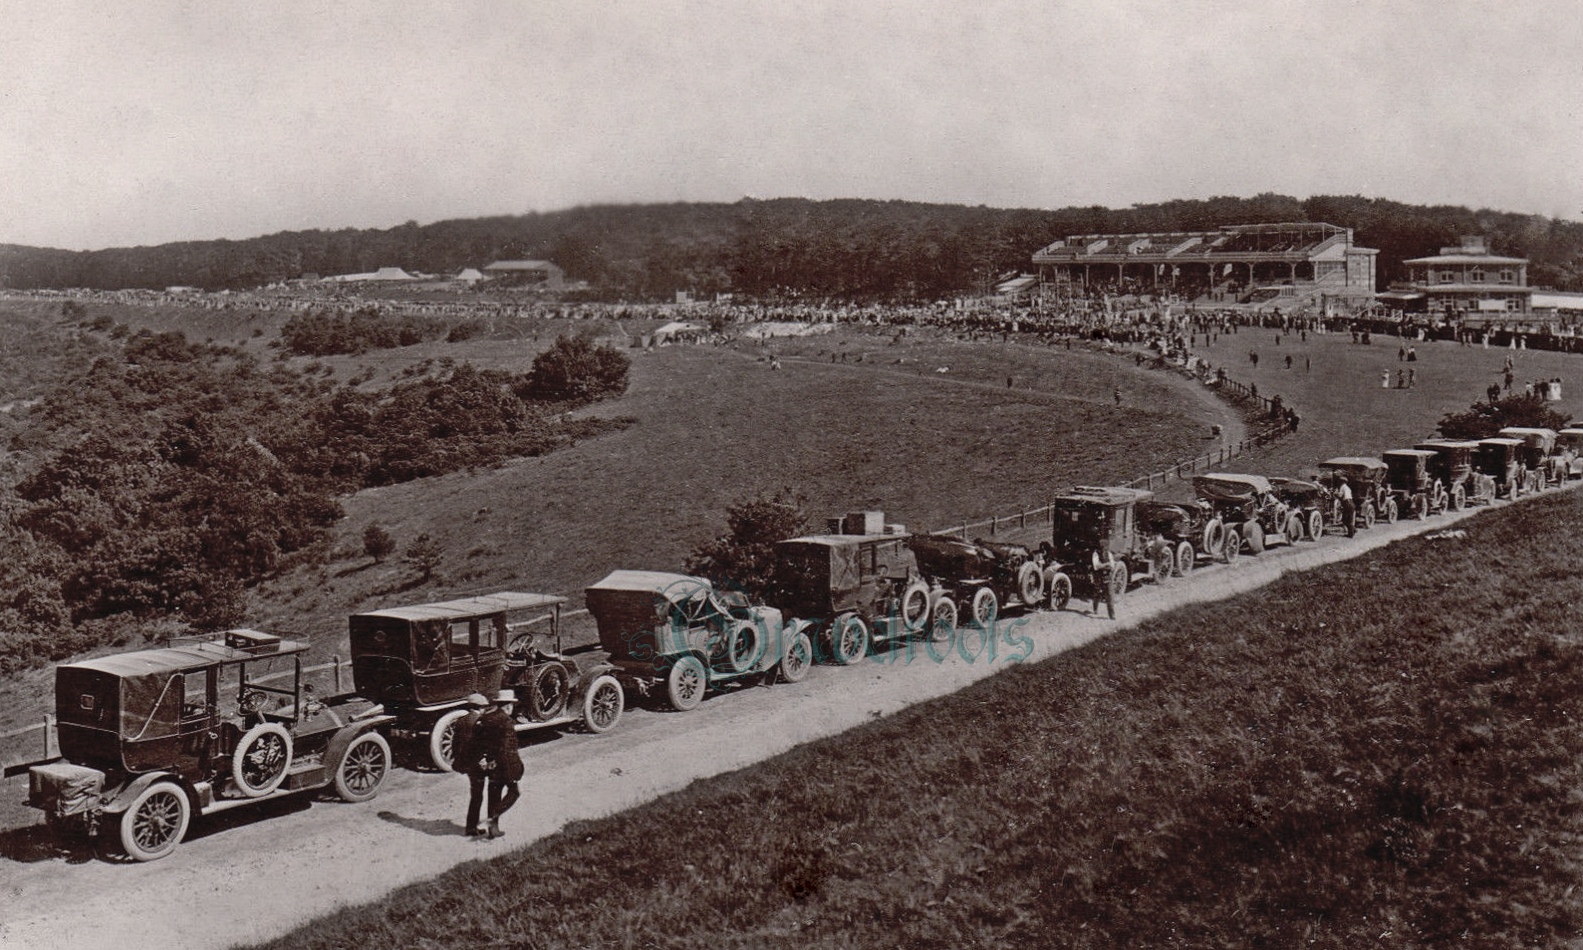  old photos of Goodwood Racecourse, Chichester, Sussex - click image below to return